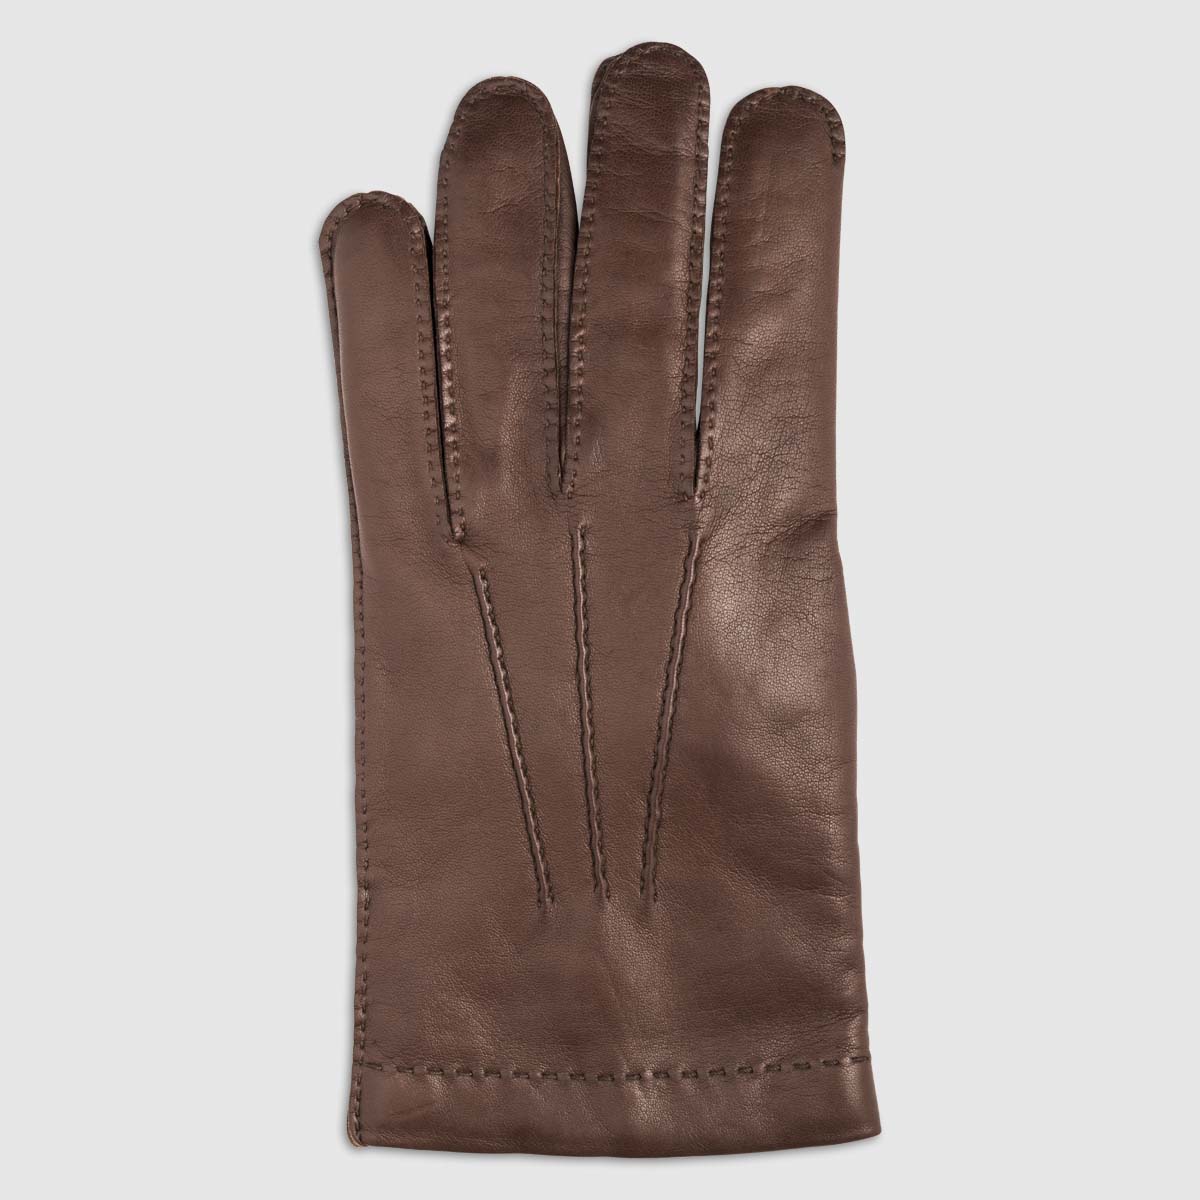 Hand-Stitched Nappa Leather Glove with Cashmere Lining in Conker – 8.5